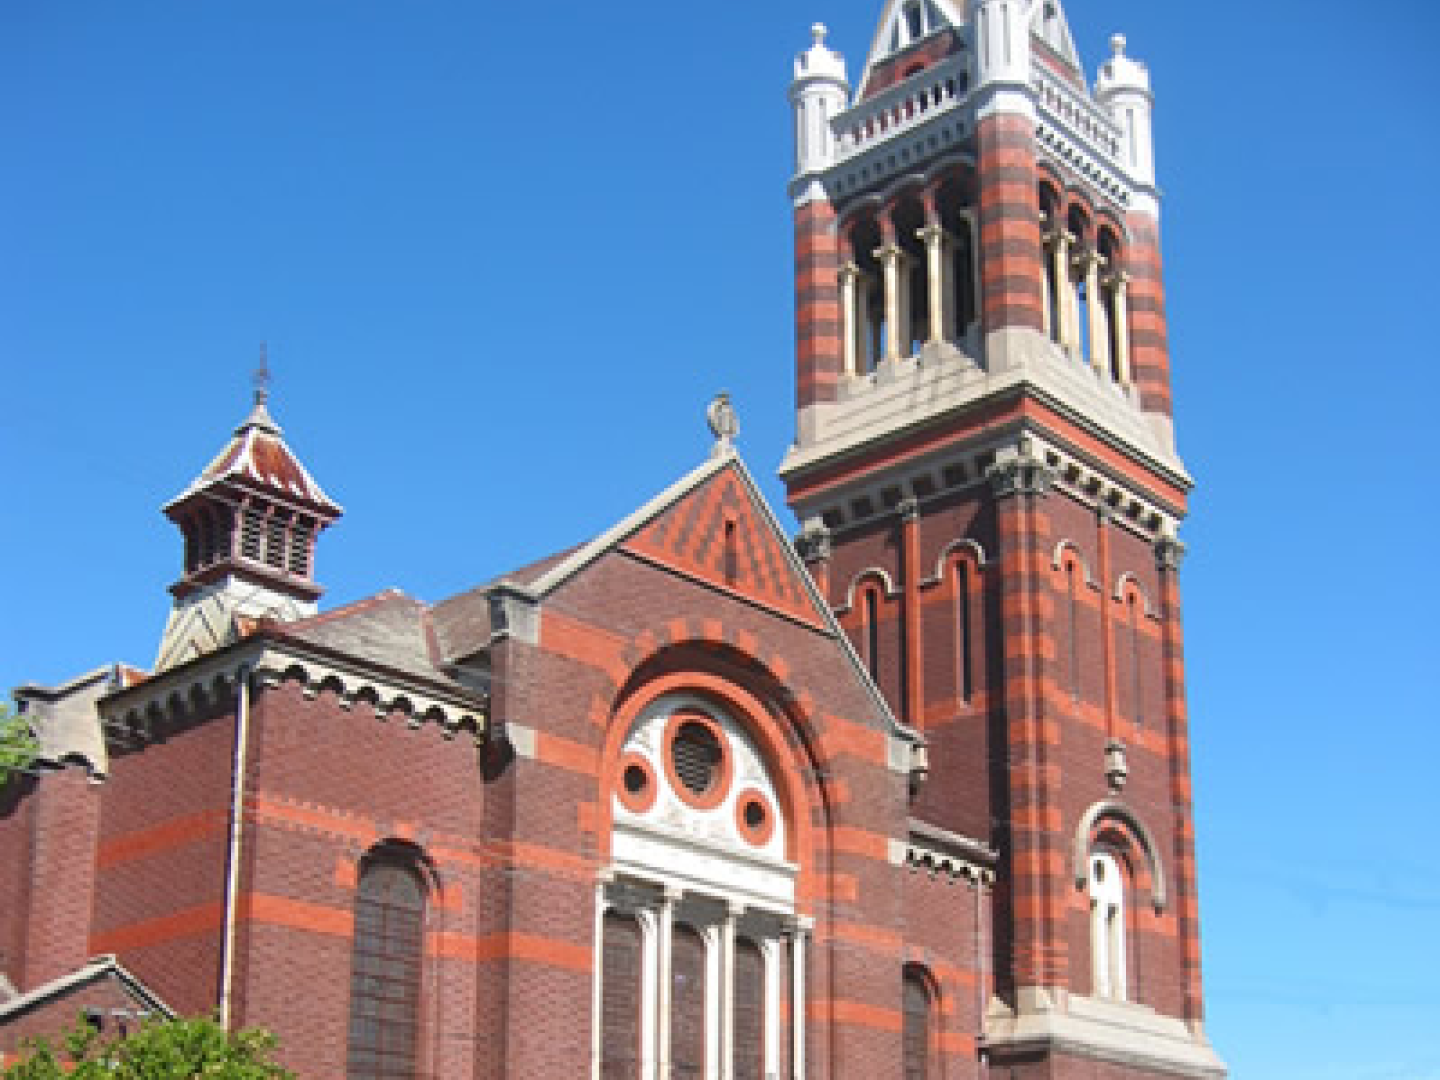 Looking up at the exterior of Auburn Uniting Church showing it's red brick design and tower